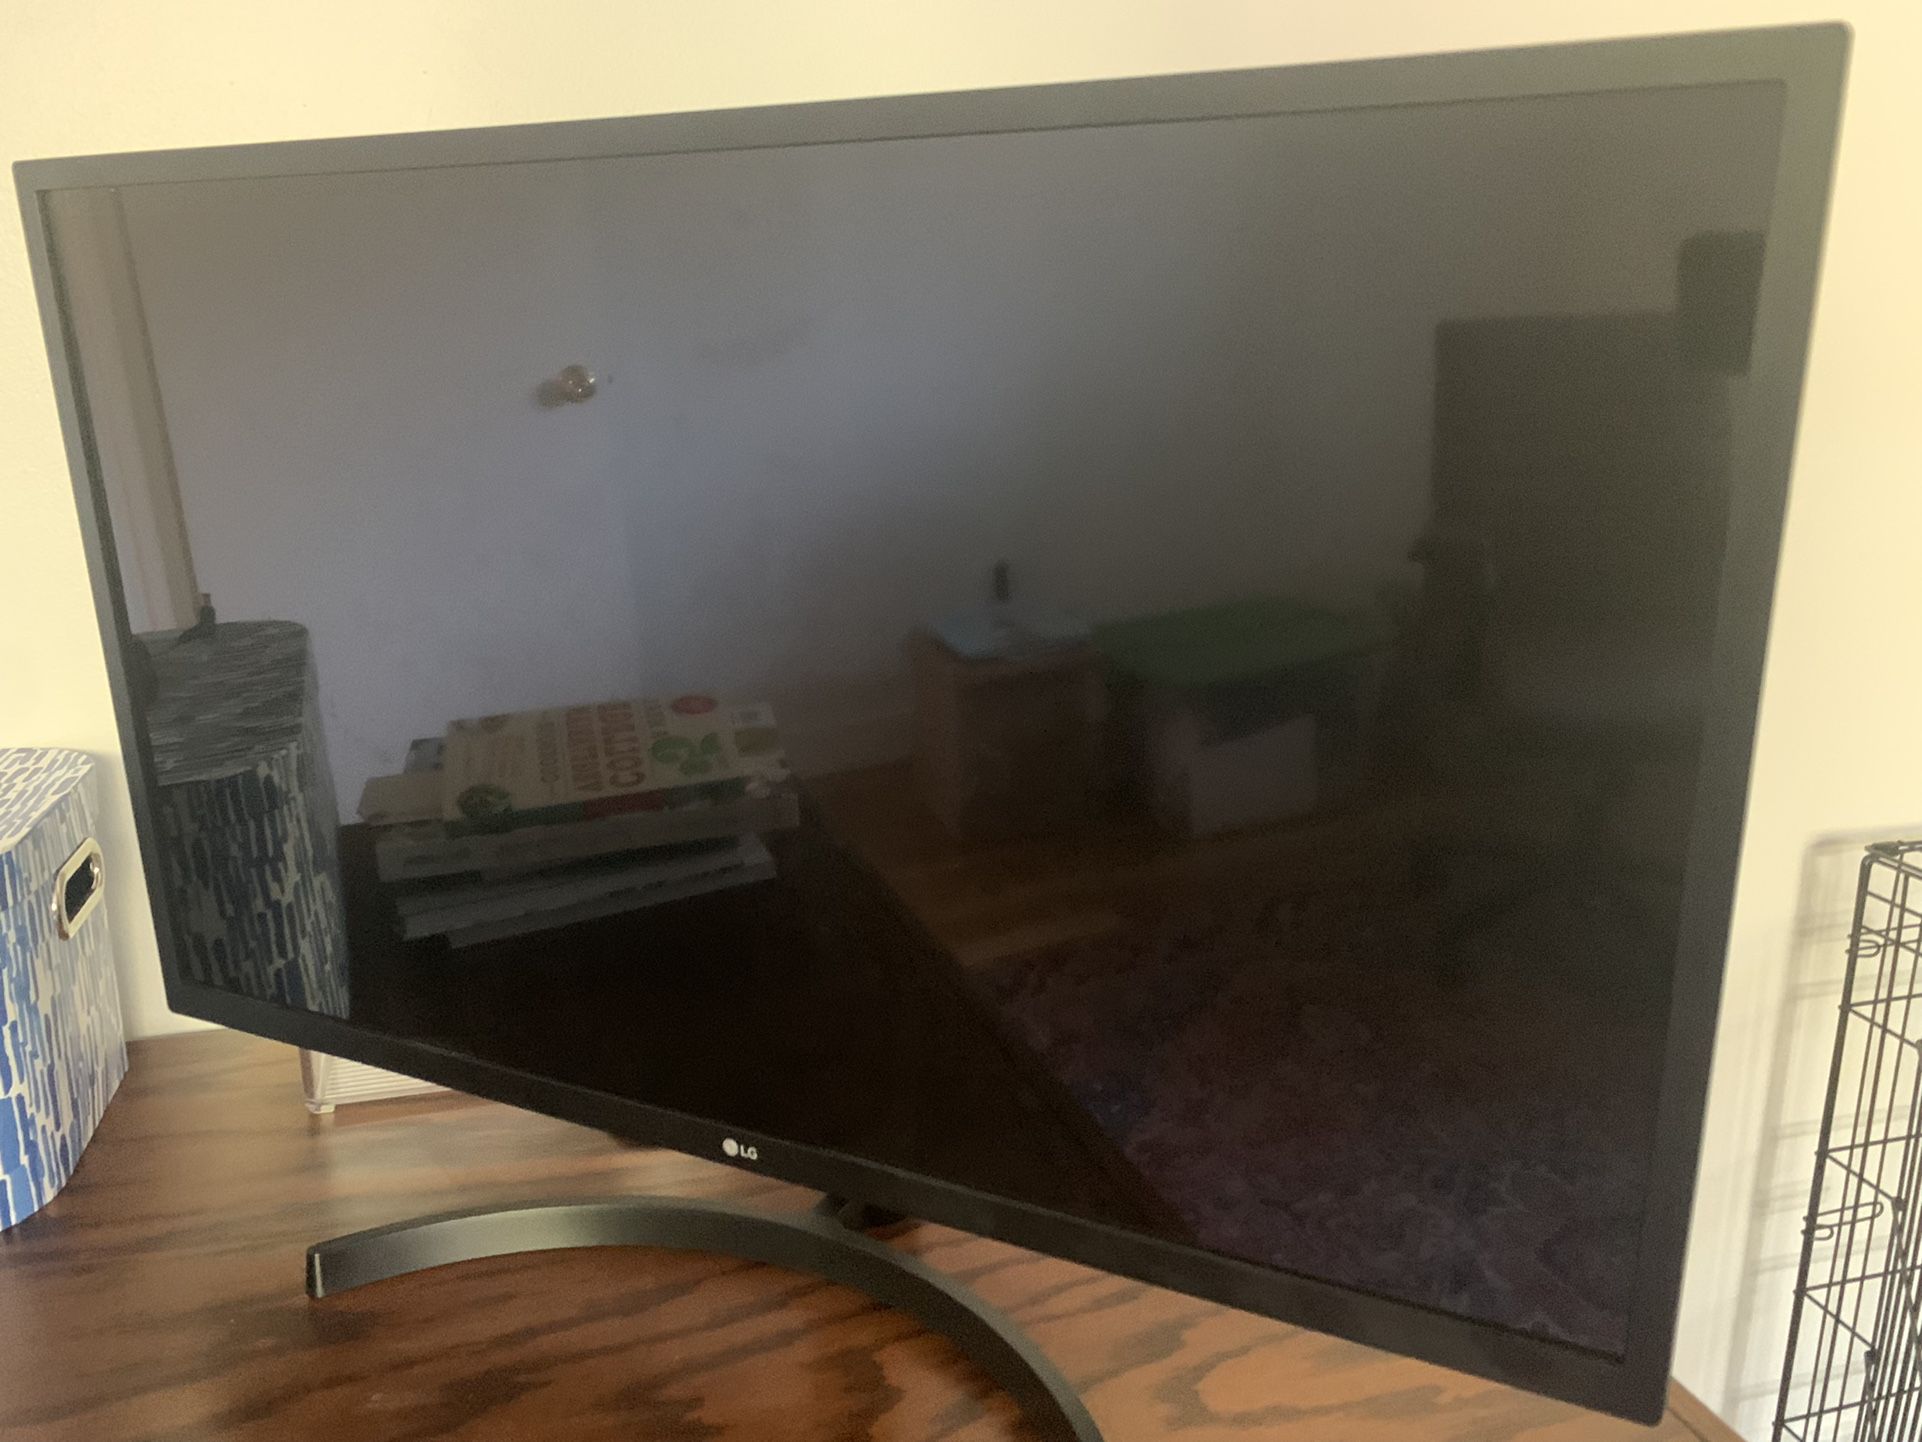 LG 32'' FHD IPS Monitor with FreeSync 1080